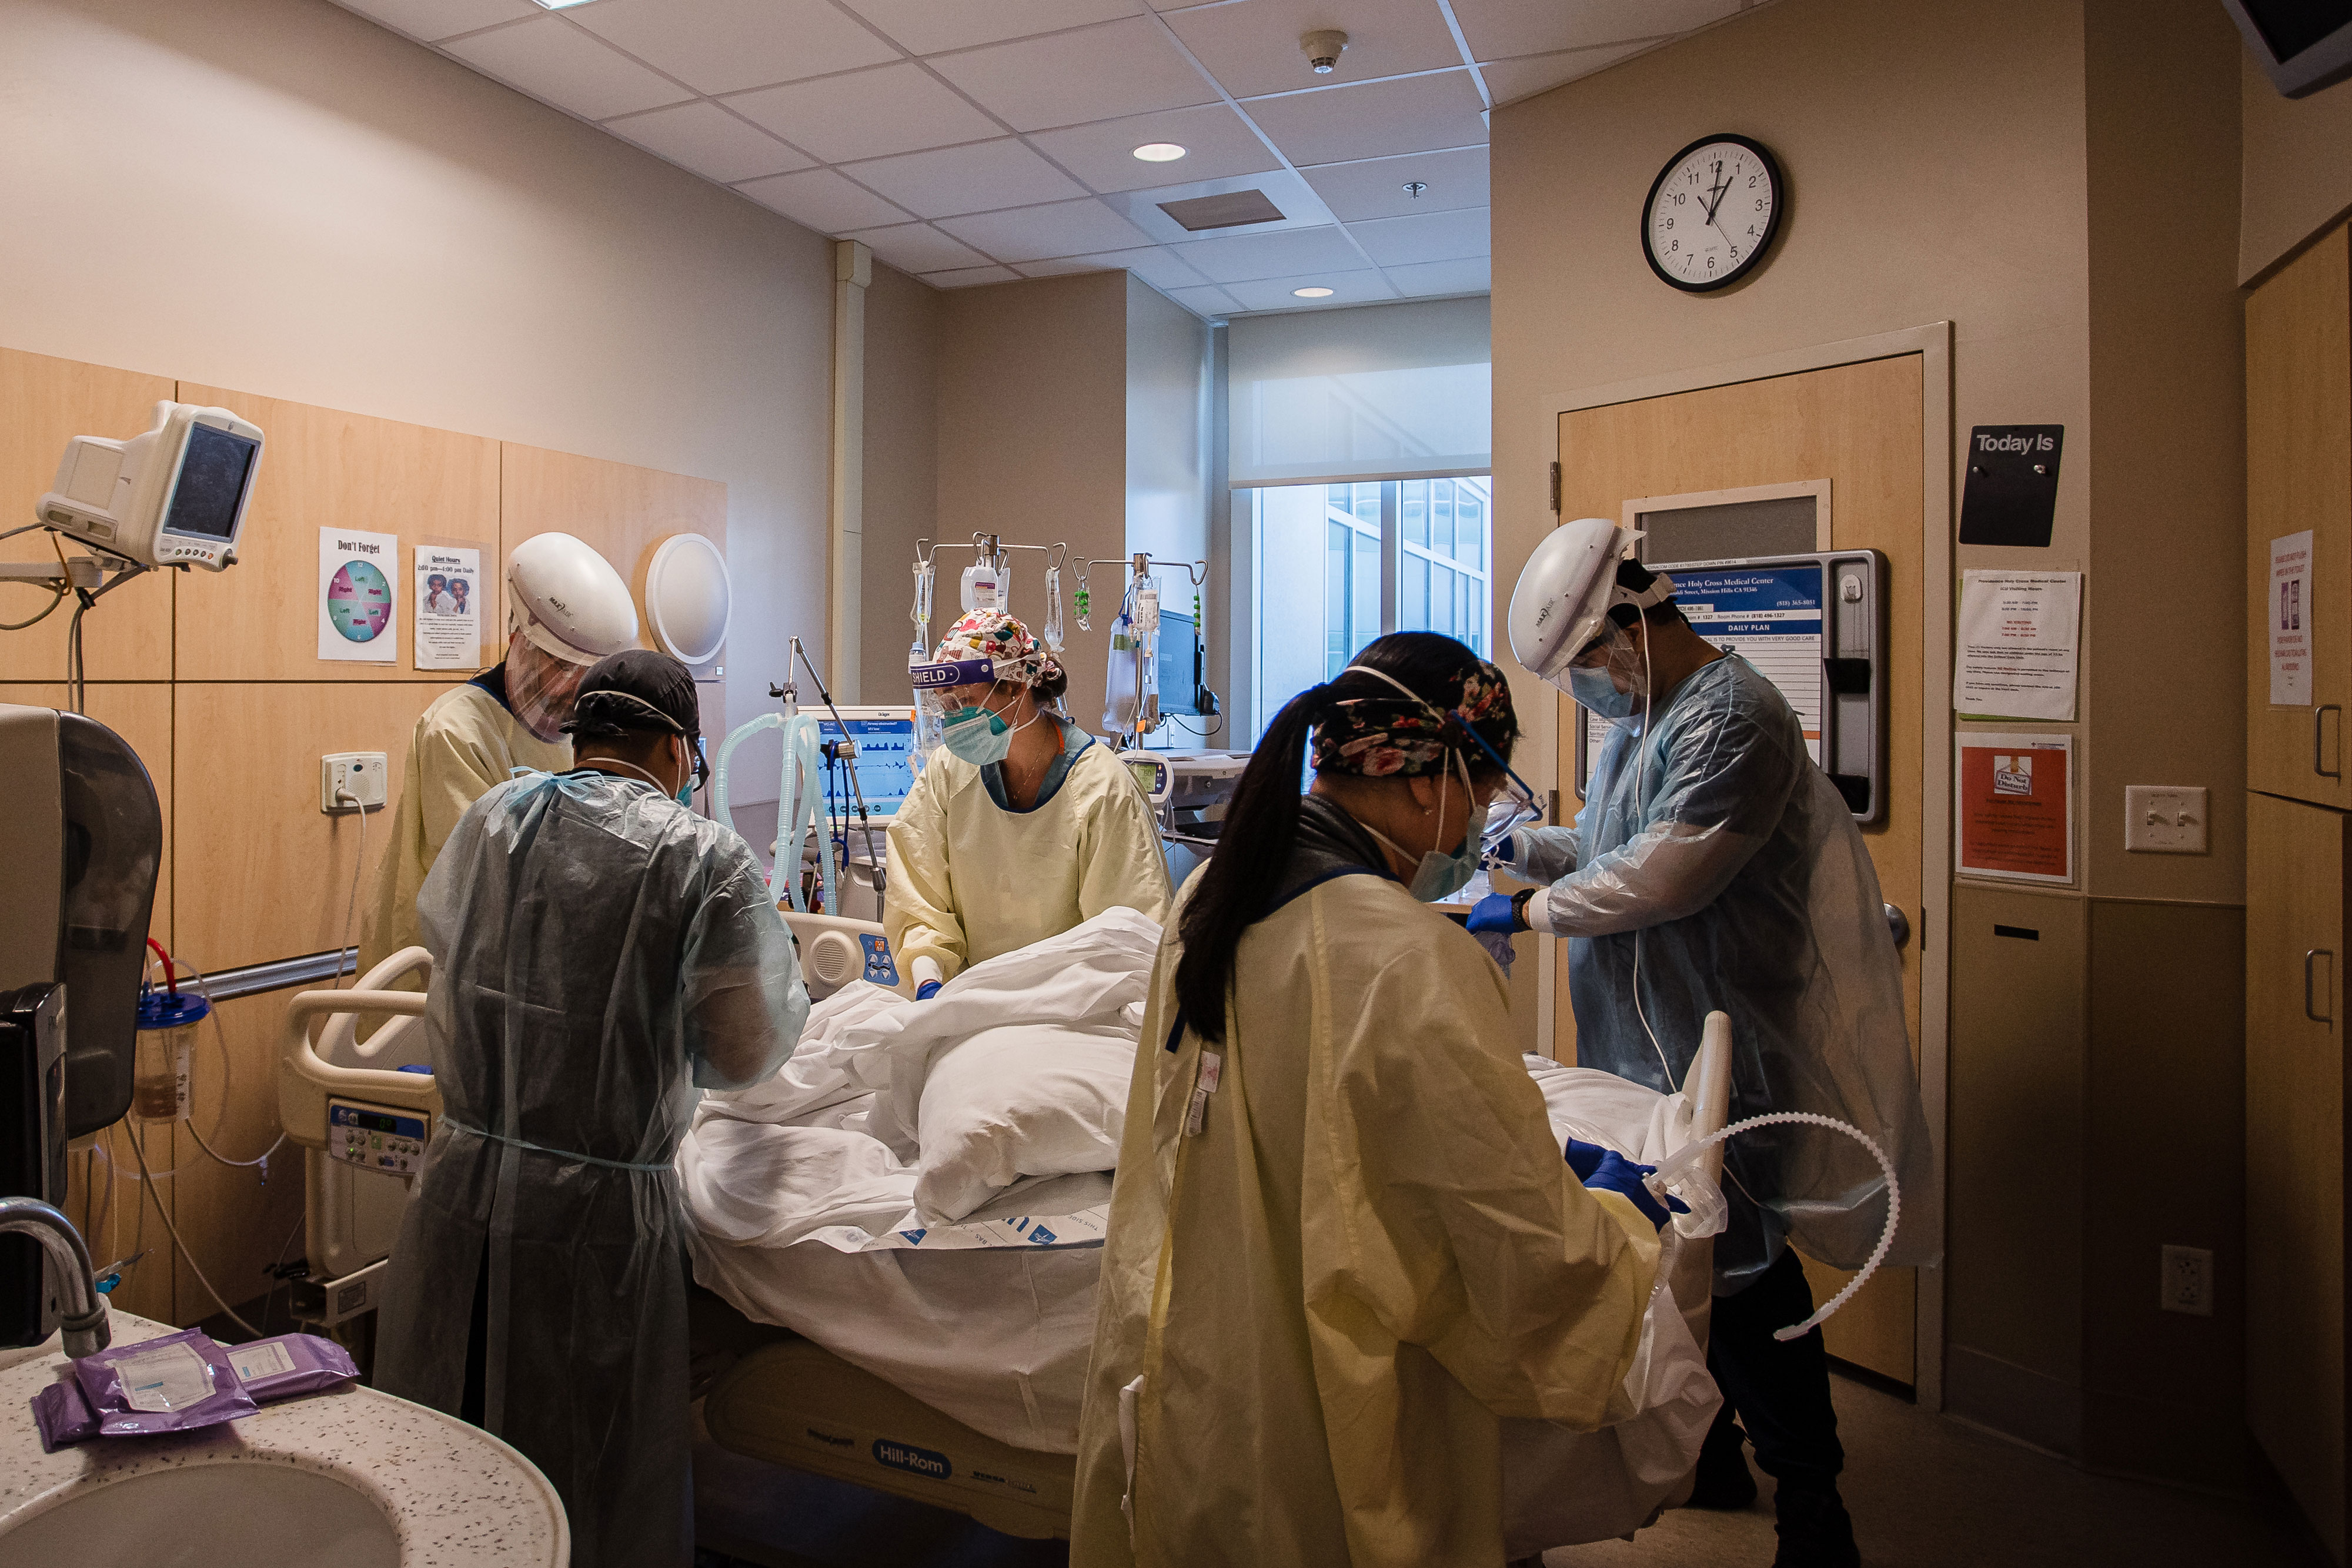 Health care workers assist a patient in the overflow area of the Covid-19 intensive care unit at Providence Holy Cross Medical Center - Mission Hills in Los Angeles on February 5.